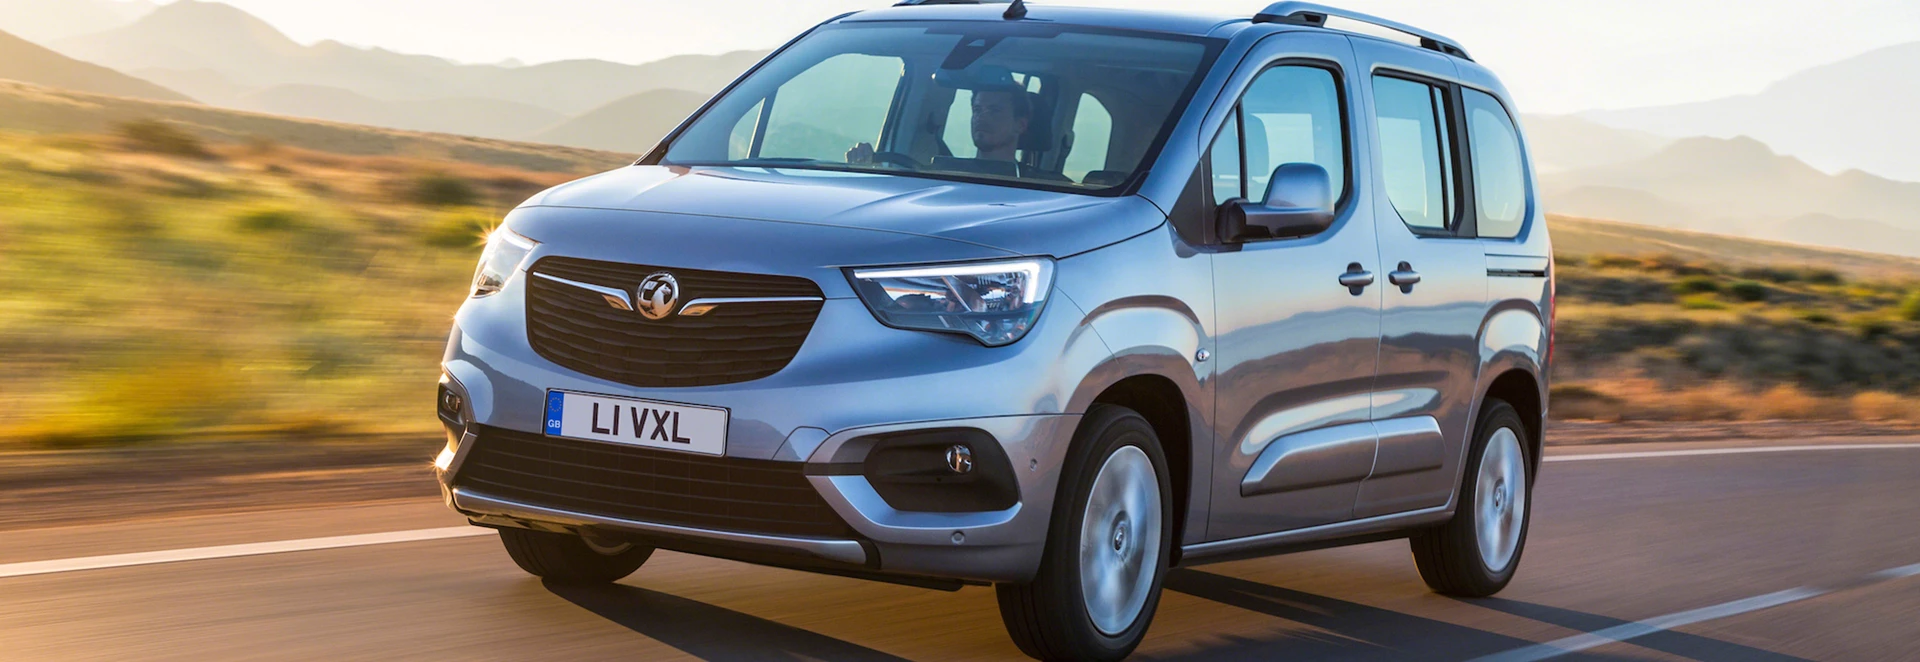 2018 Vauxhall Combo Life review